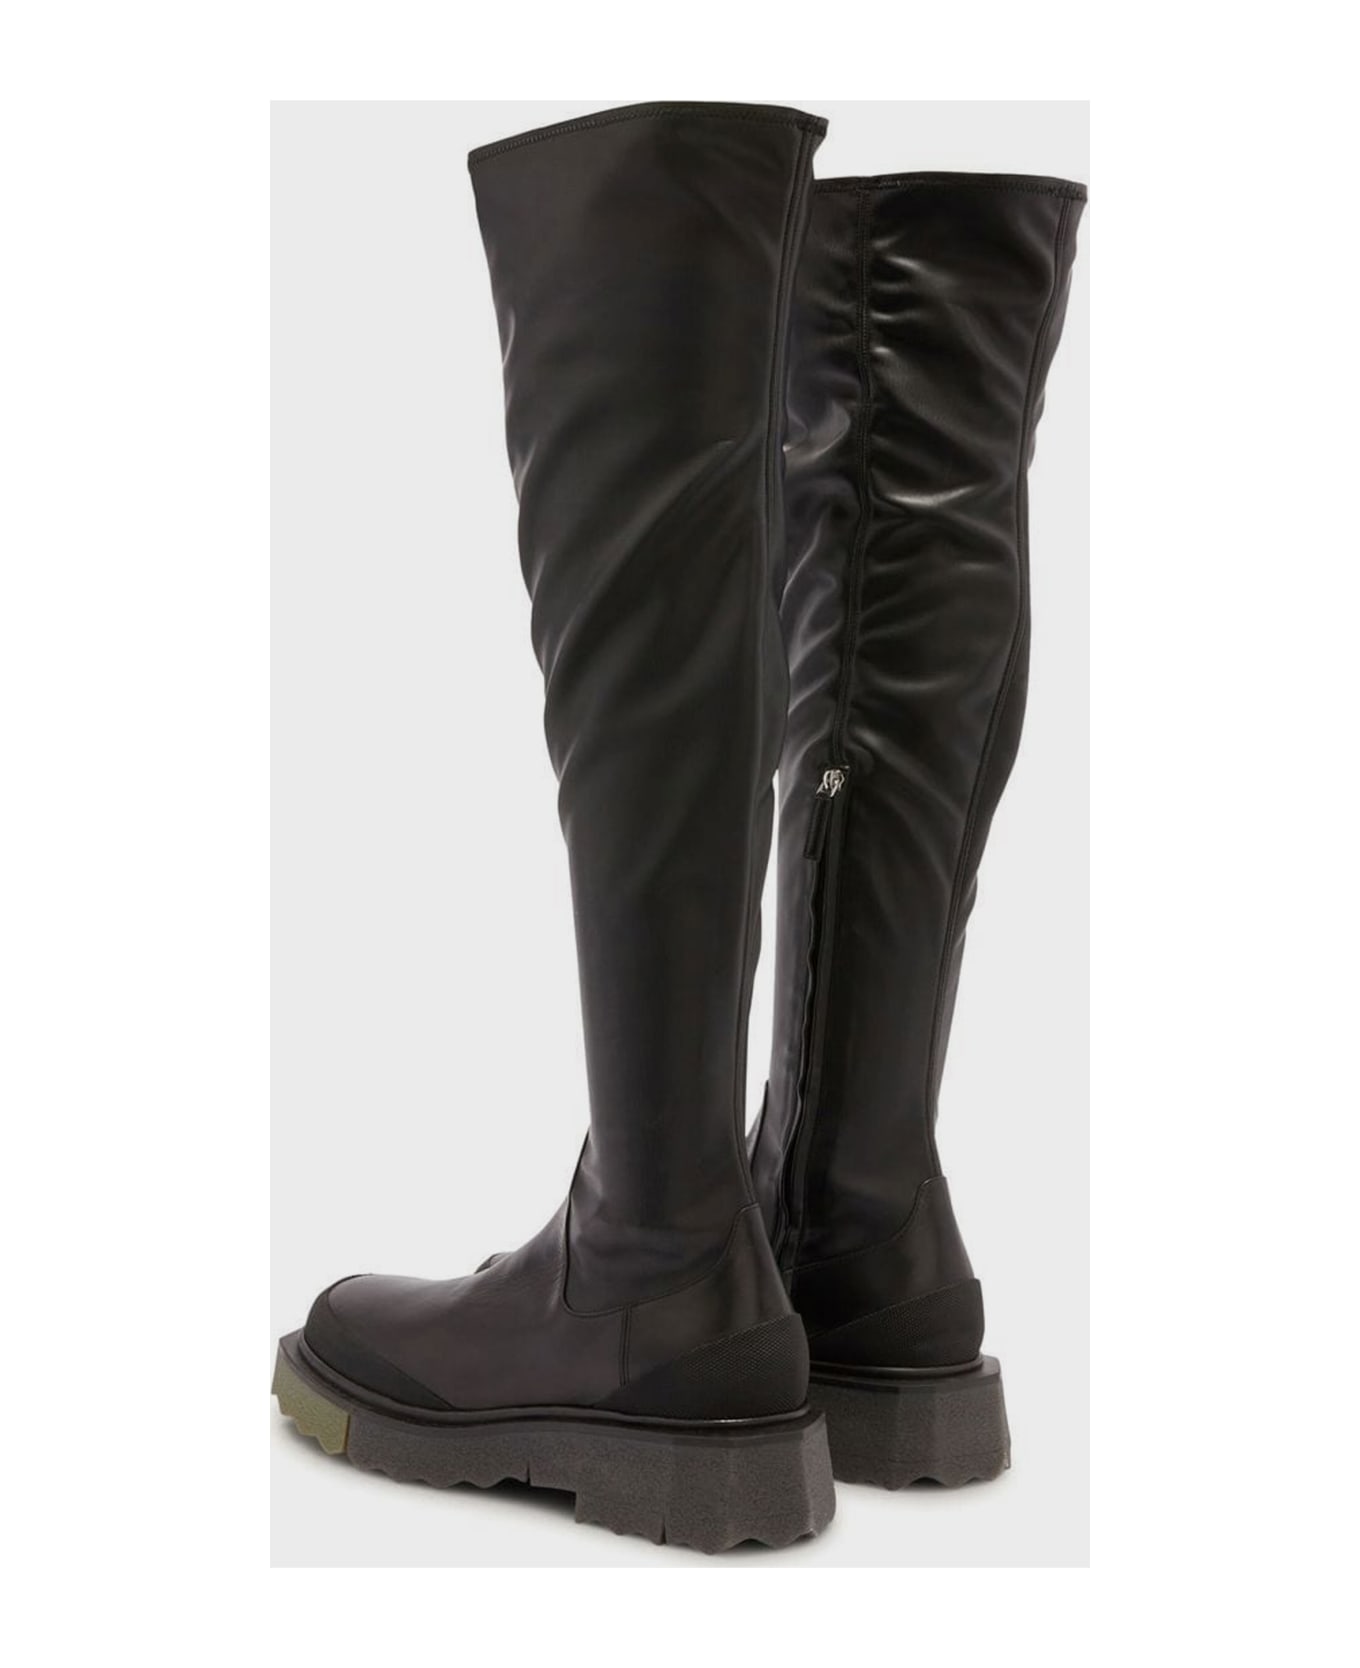 Off-White Leather High Boots - BLACK ブーツ